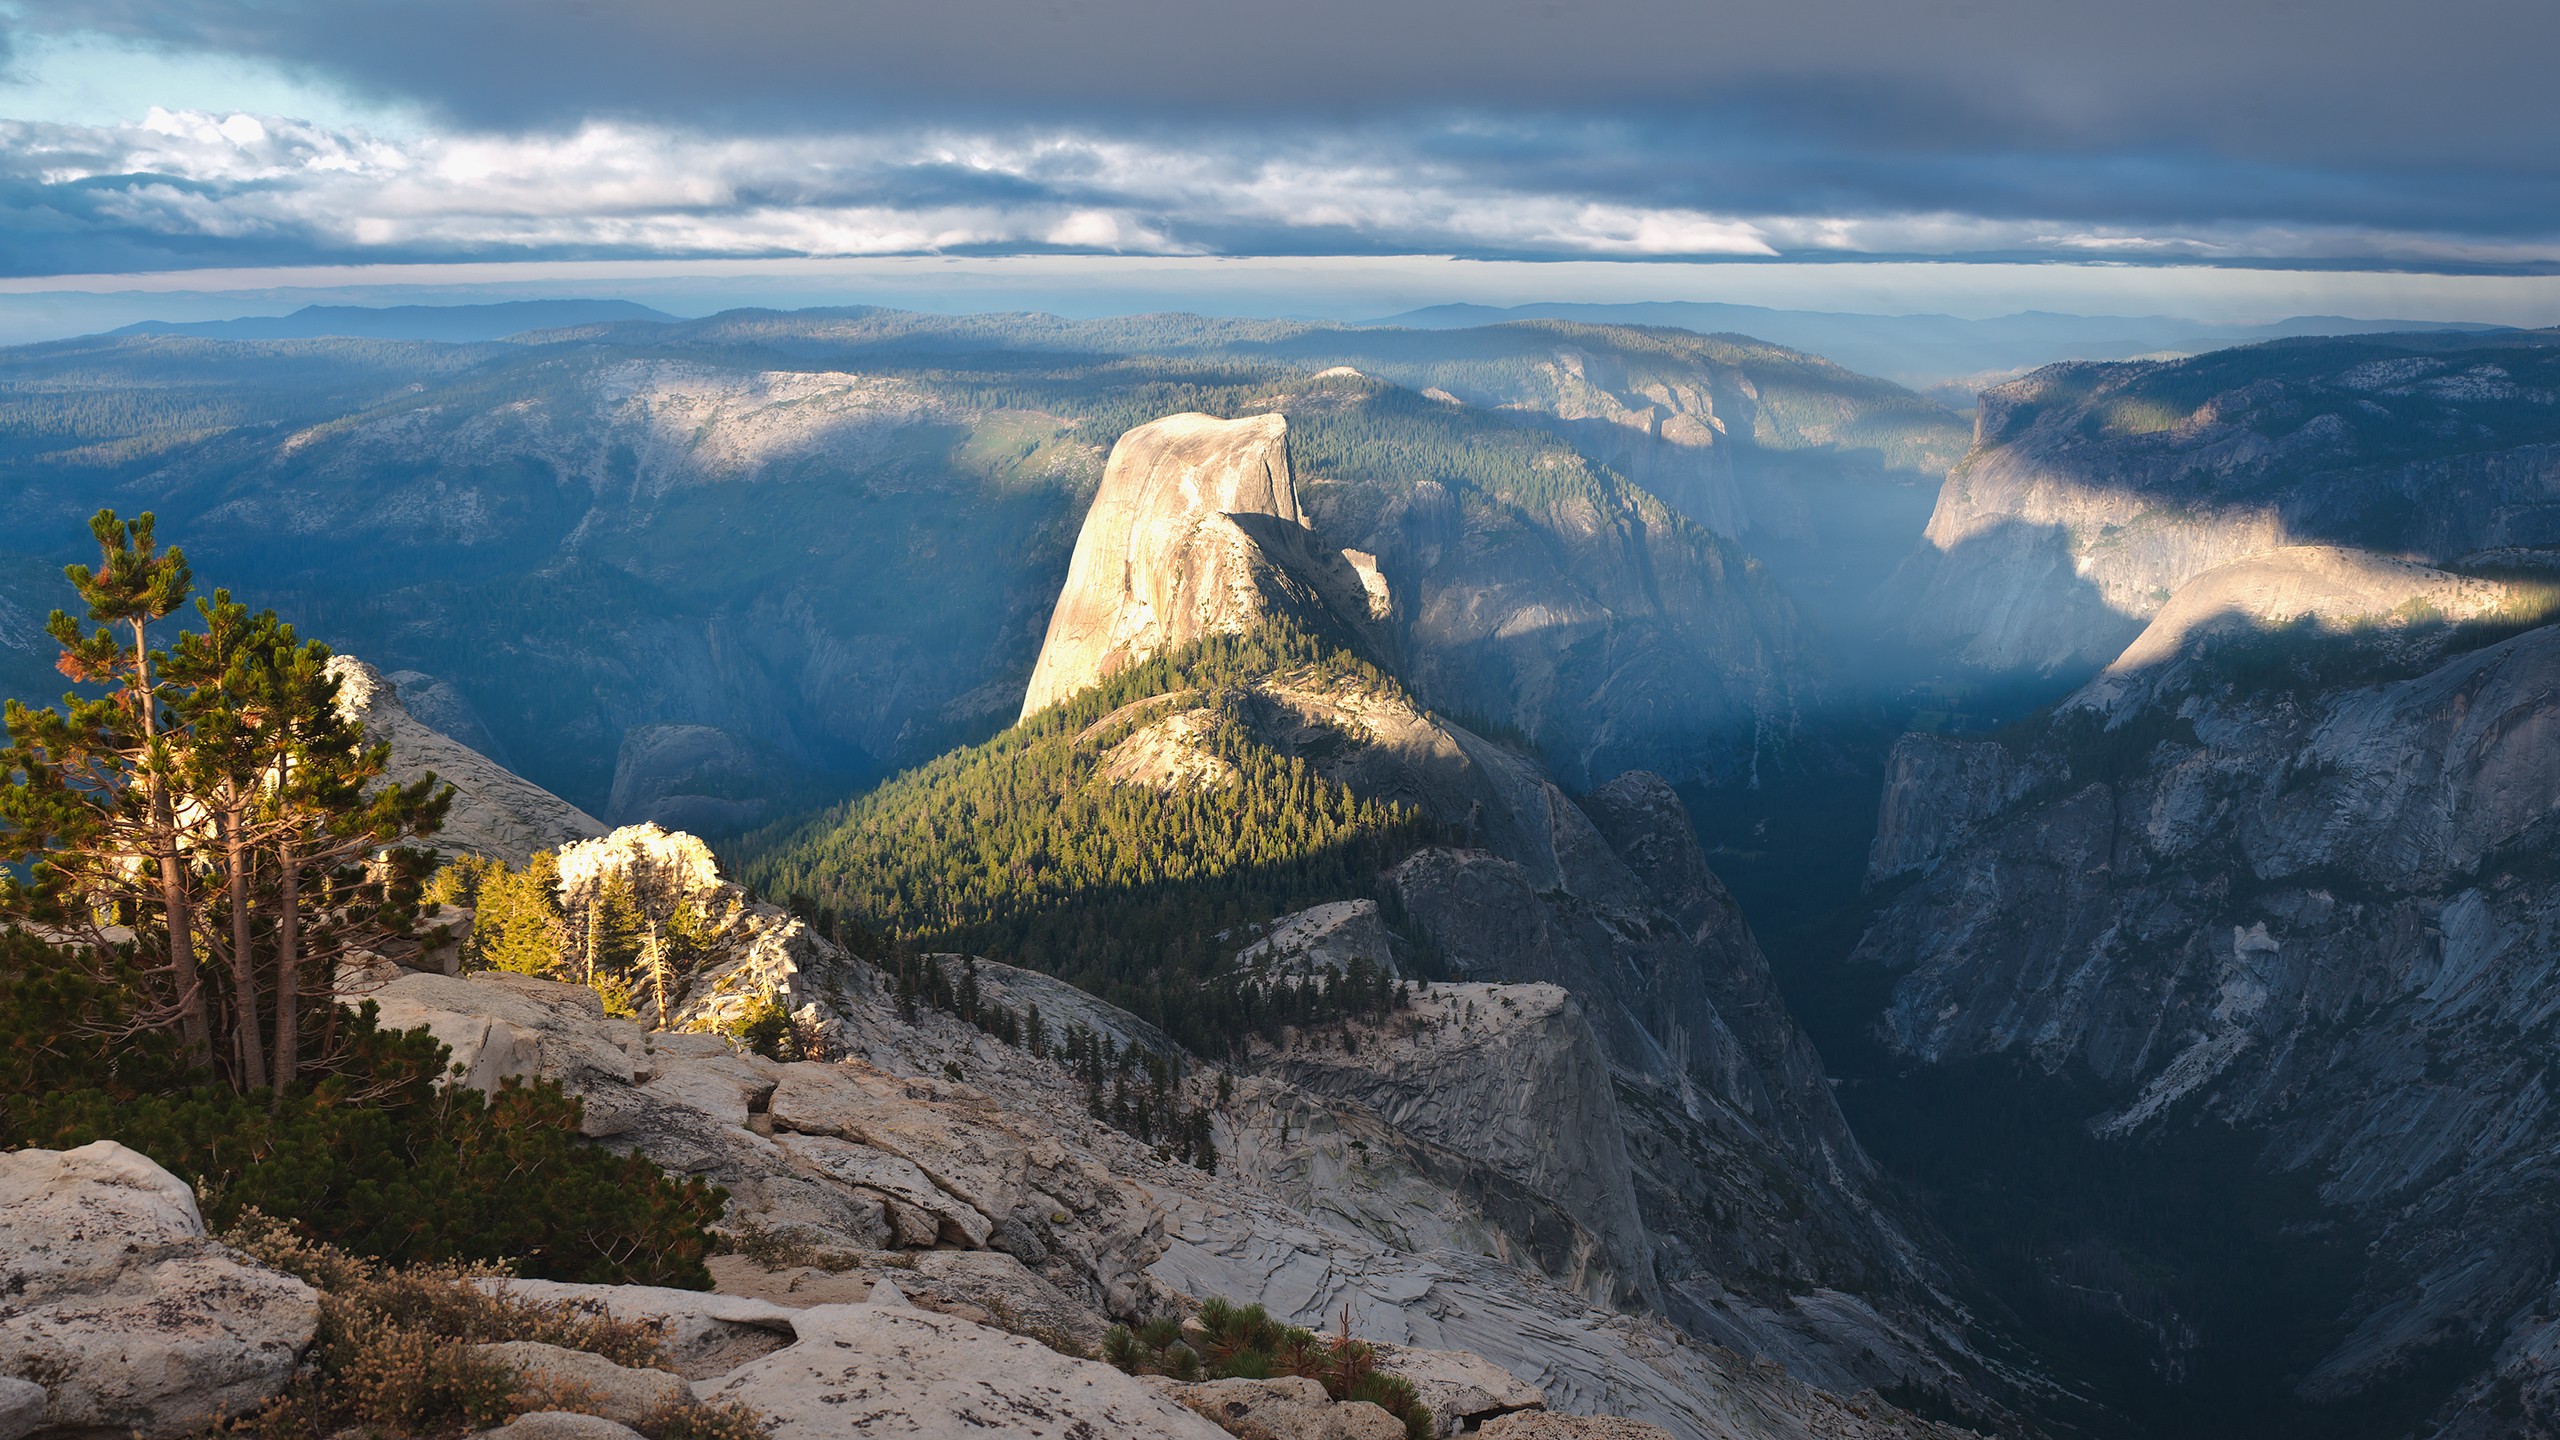 General 2560x1440 landscape Yosemite National Park gorge mountains valley California USA Half Dome